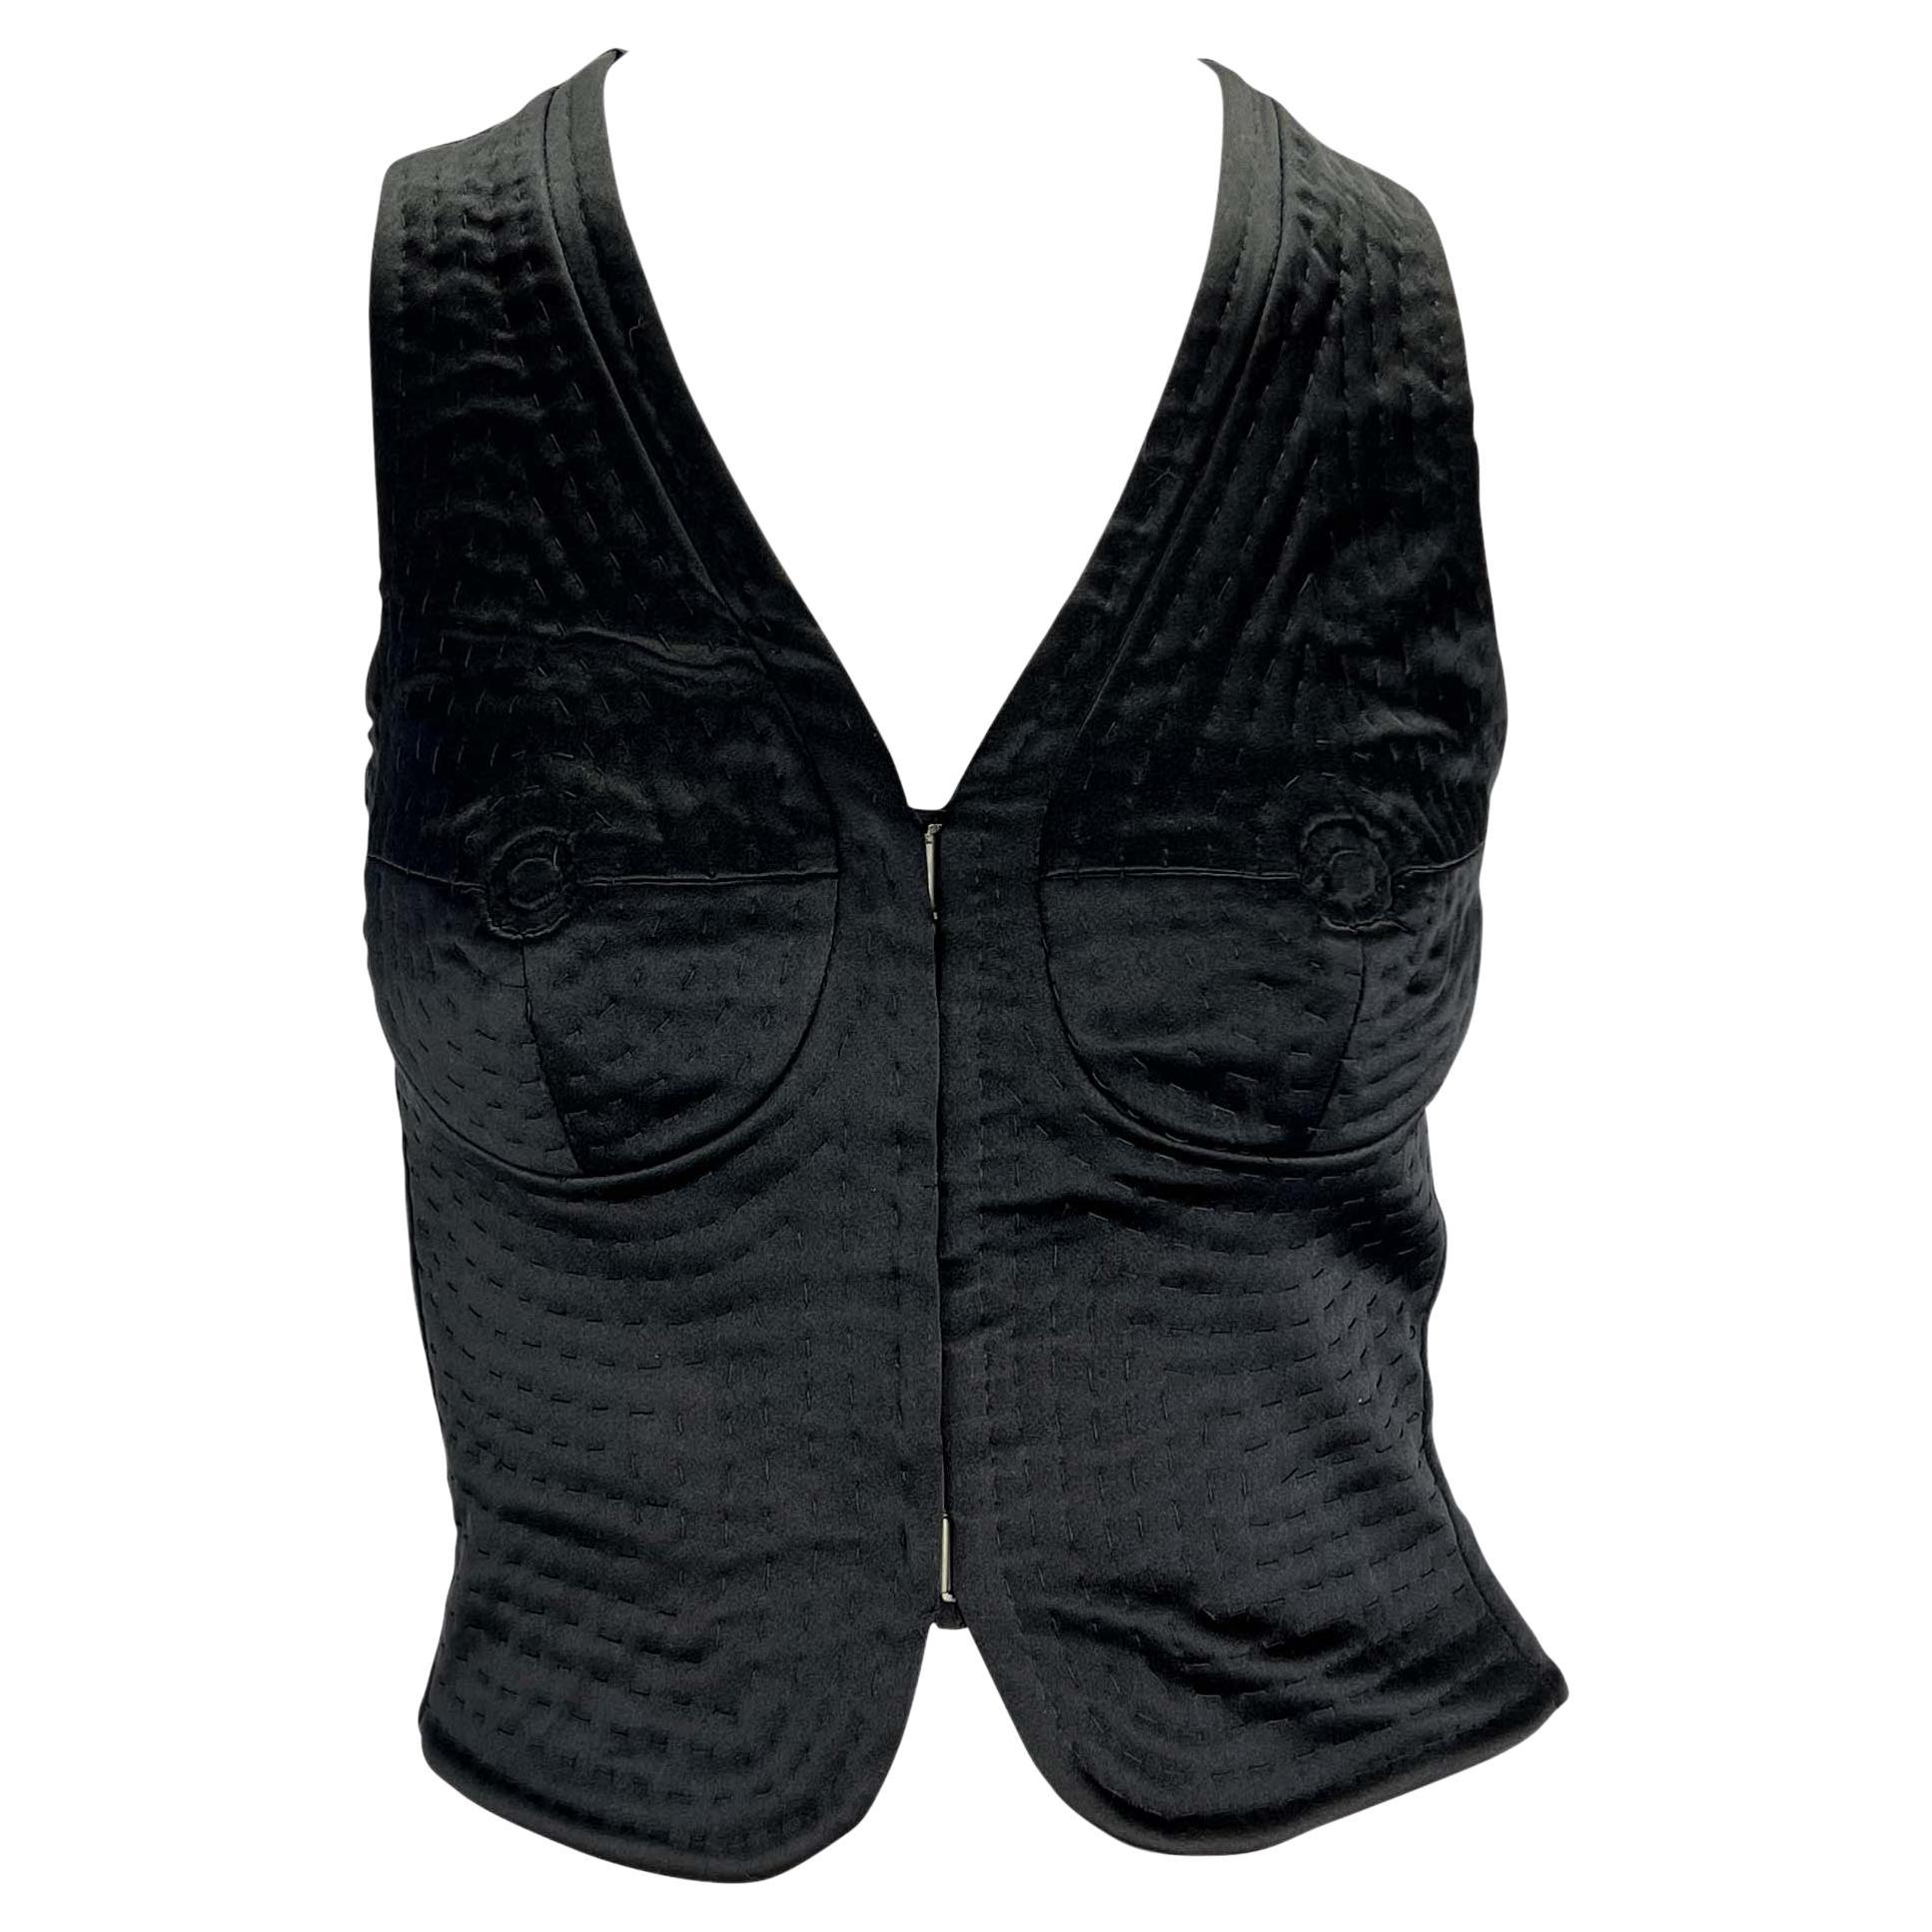 S/S 2003 Yves Saint Laurent by Tom Ford Runway Nude Illusion Satin Breast Vest  6